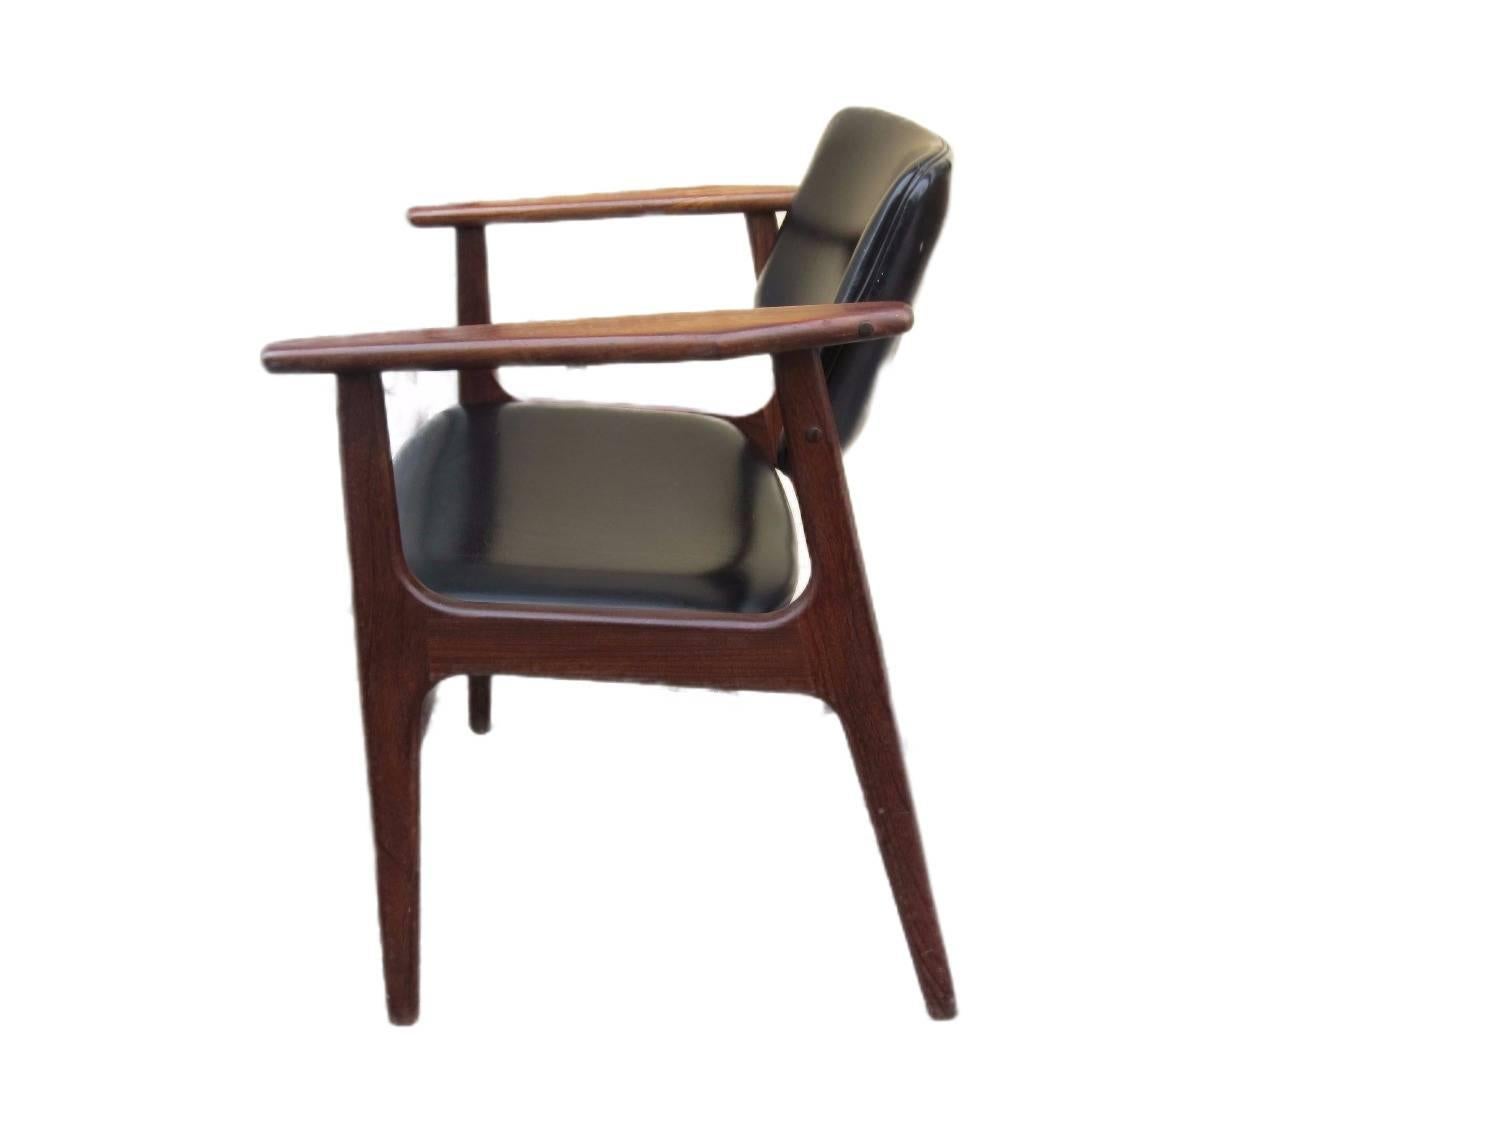 Lovely Danish Mid-Century teak armchair. The seat and backrest have been re-upholstered with black imitation leather. This is a very pleasing chair both for your eye and for your back.

It is produced in Denmark in the 1960s.